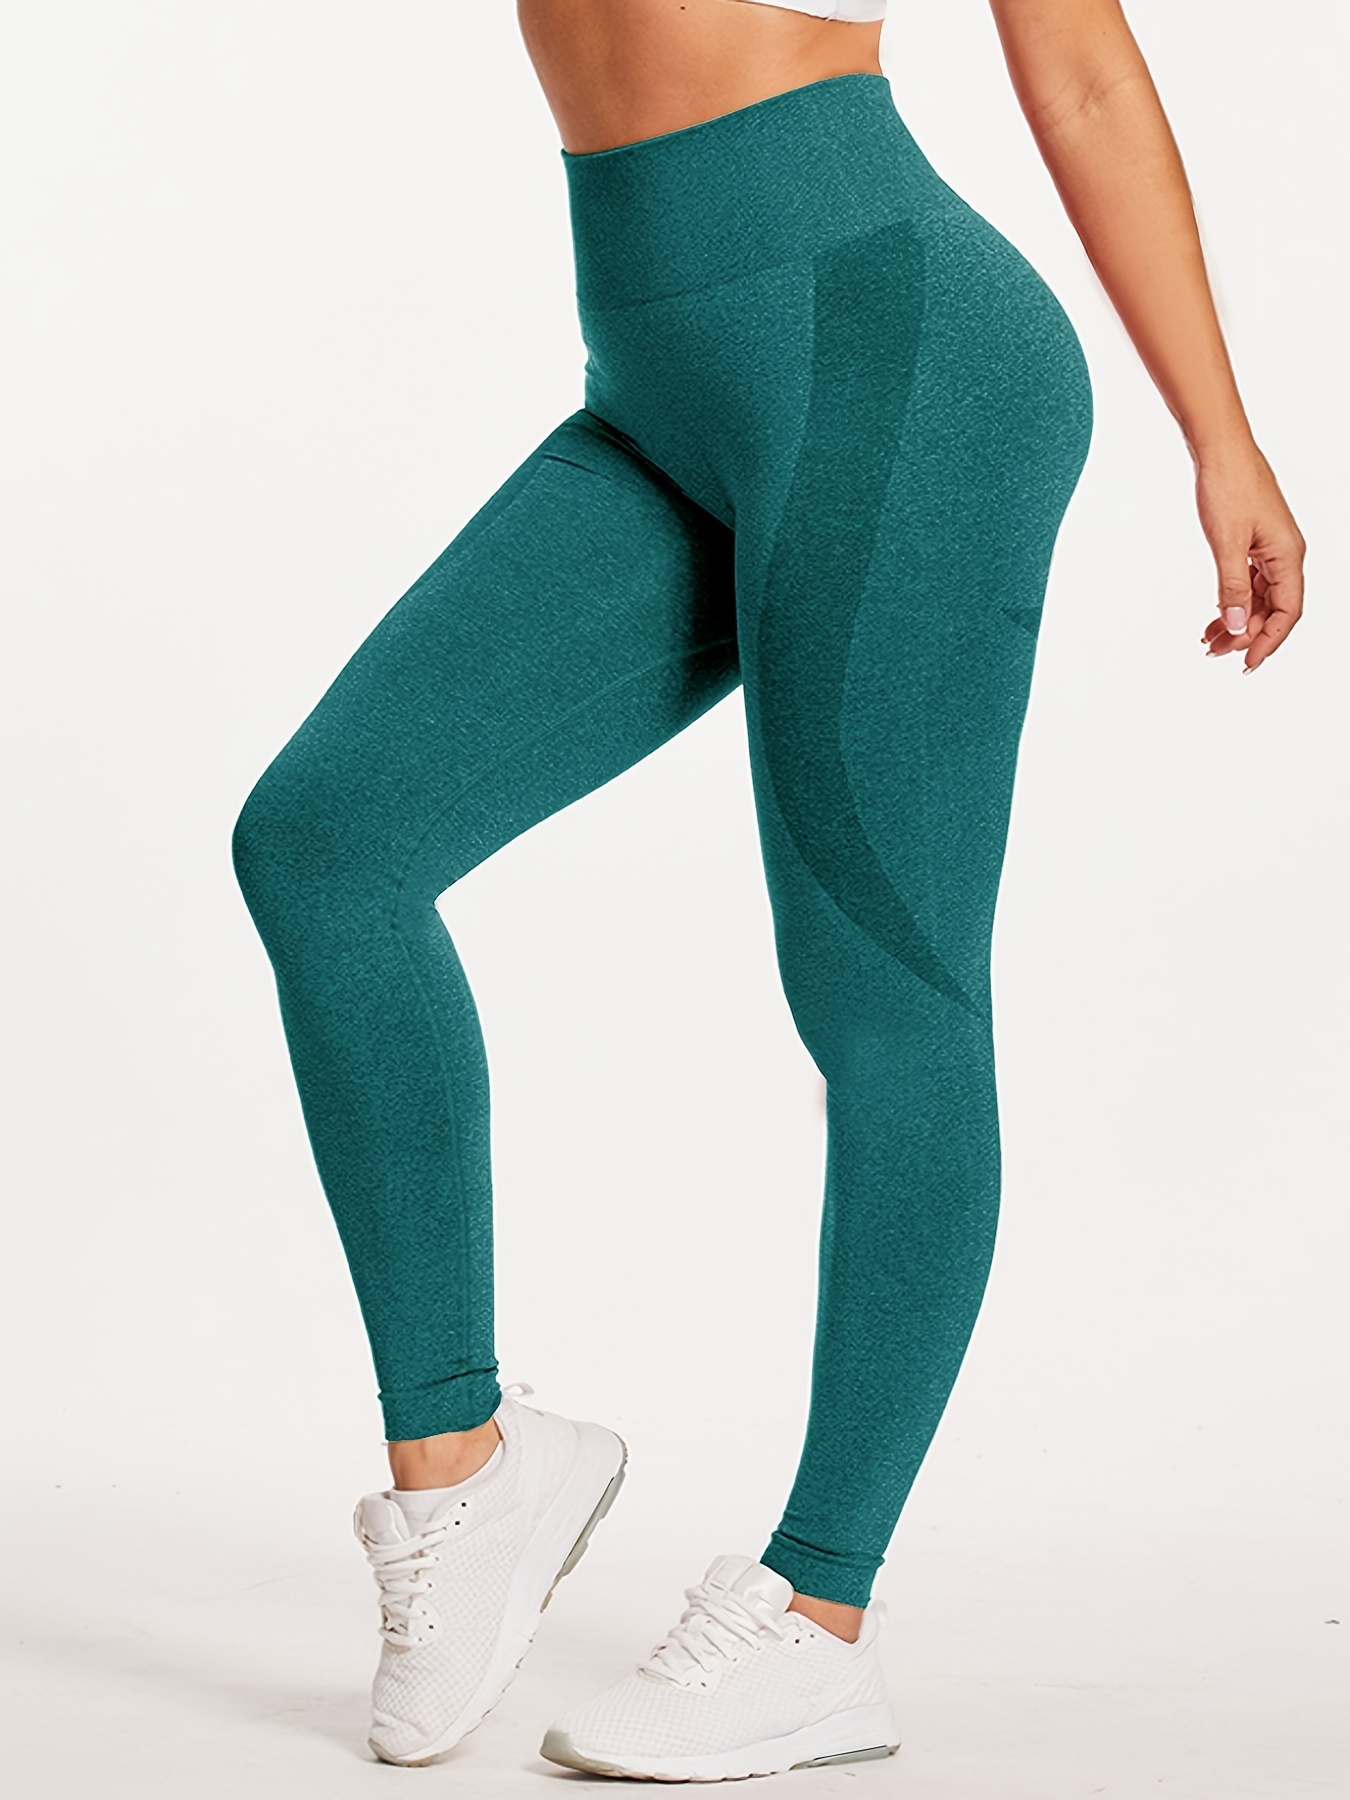 Frequency High Waisted Leggings - Mint - Ryderwear